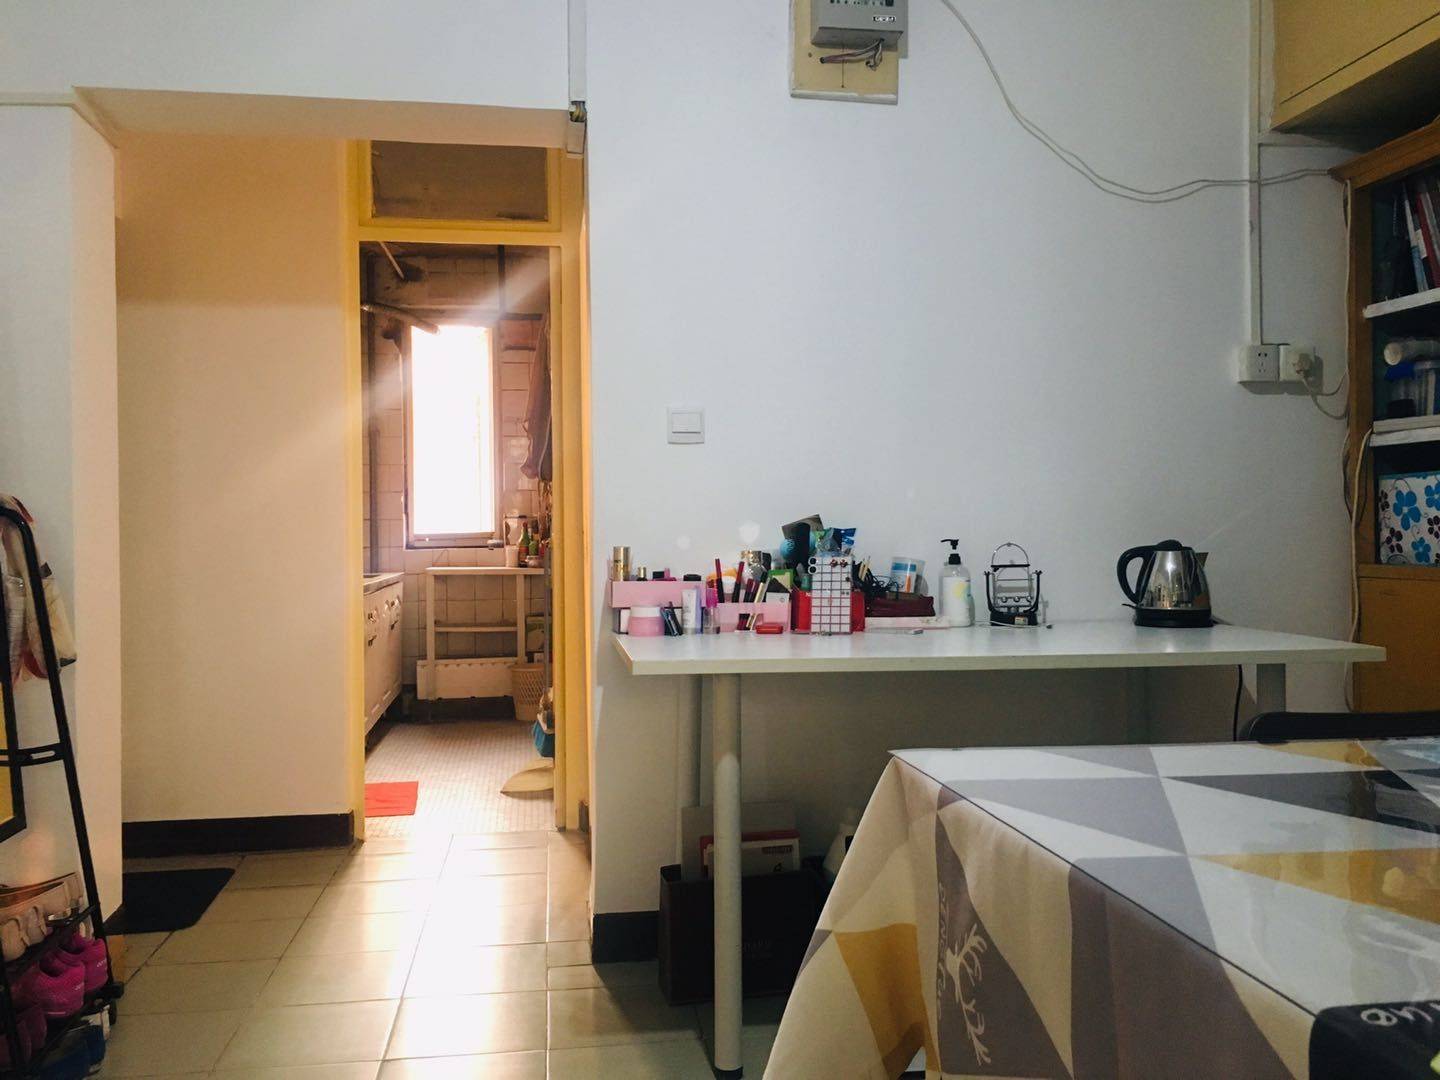 Beijing-Chaoyang-110RMB/Night,Cozy Home,Clean&Comfy,No Gender Limit,Hustle & Bustle,“Friends”